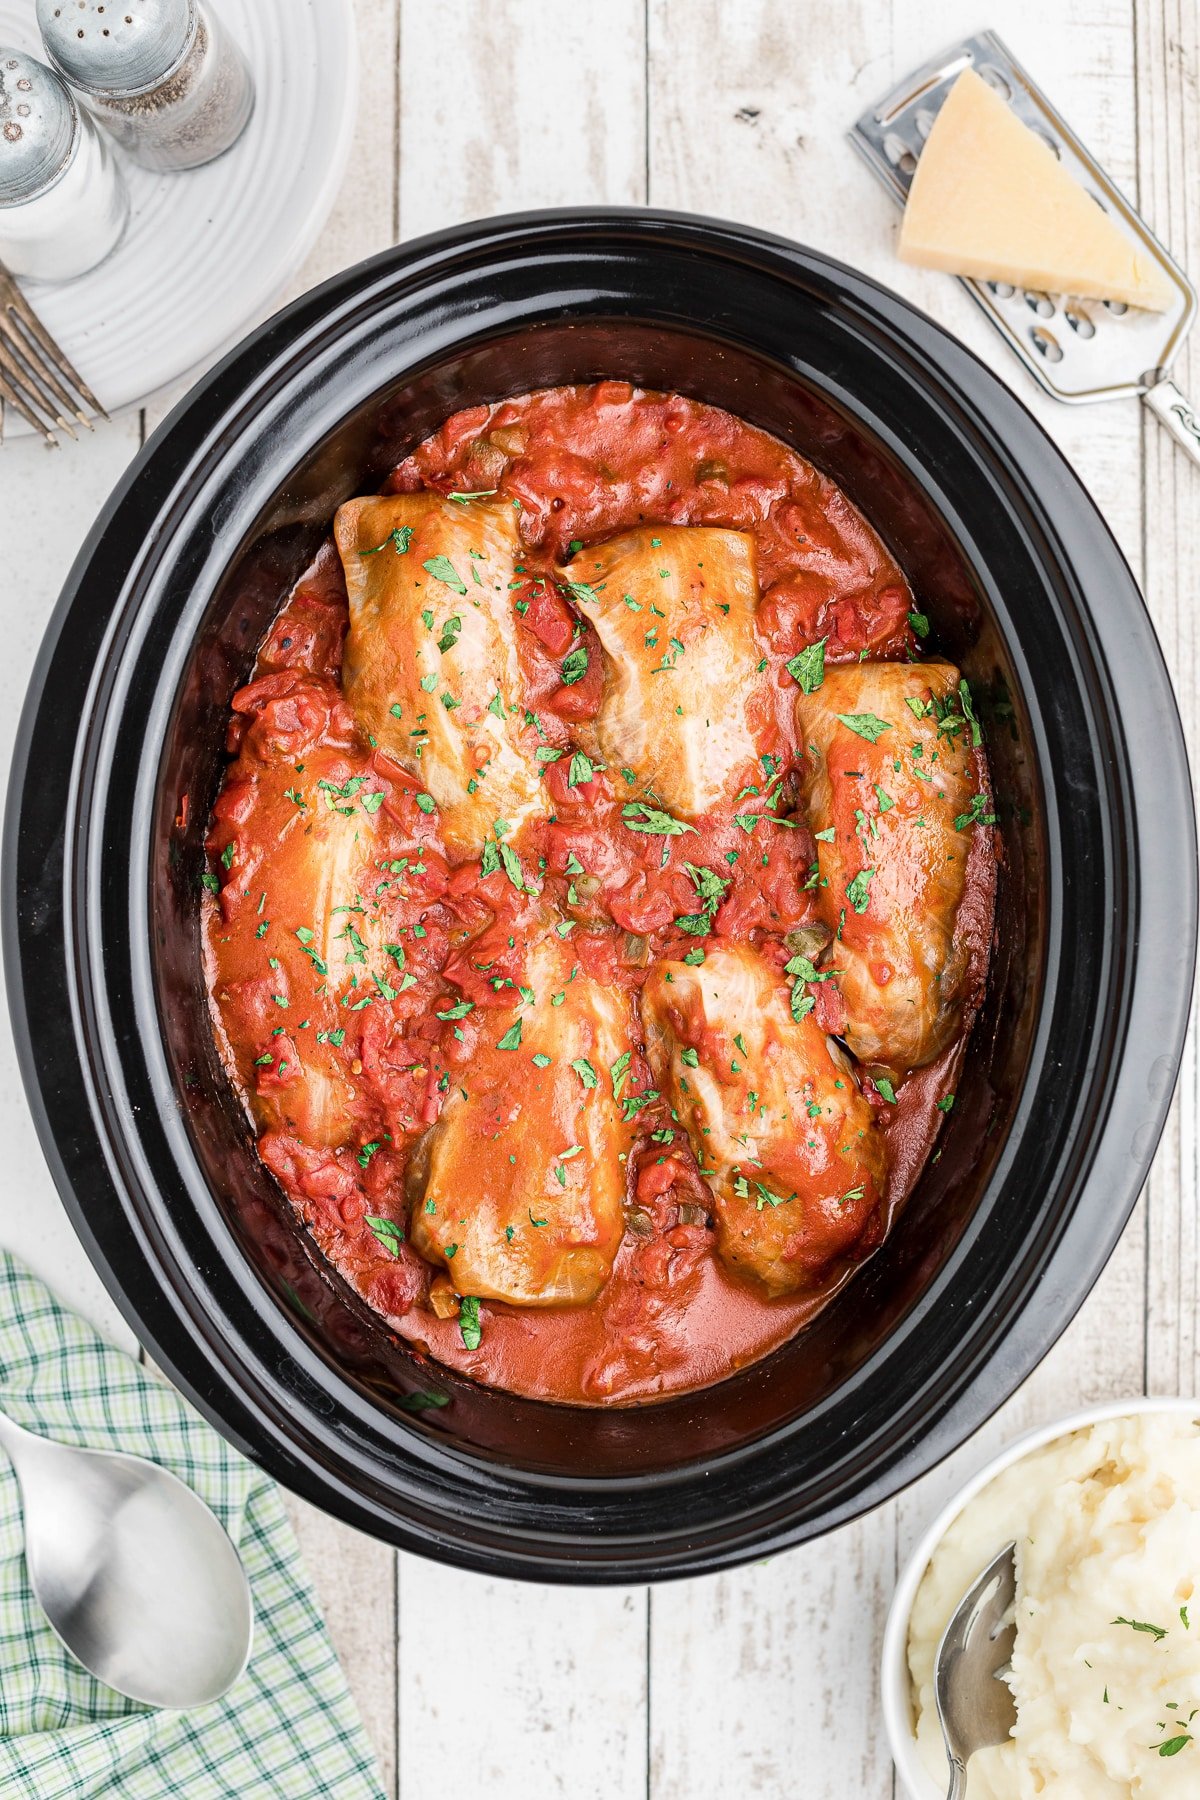 Cooked cabbage rolls in the crockpot.